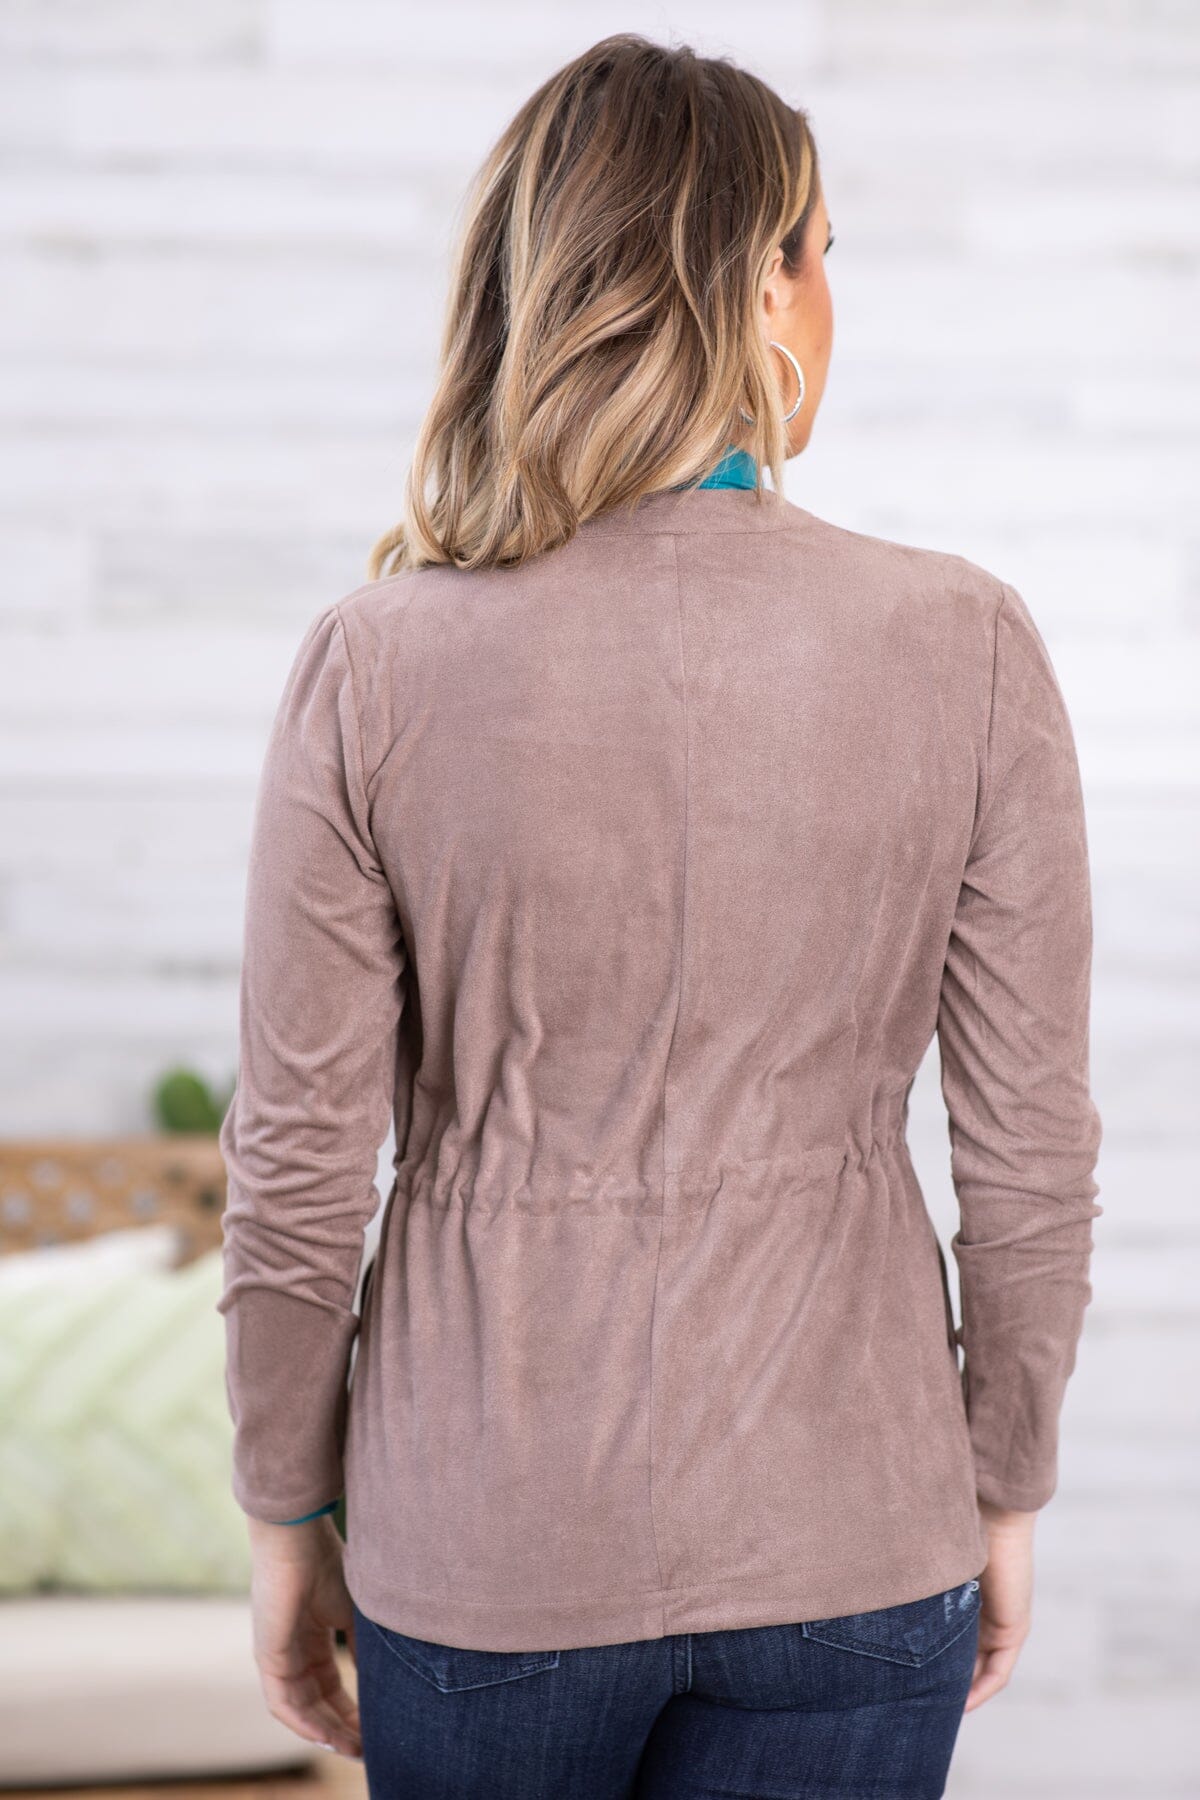 Mocha Faux Suede Waterfall Front Jacket - Filly Flair